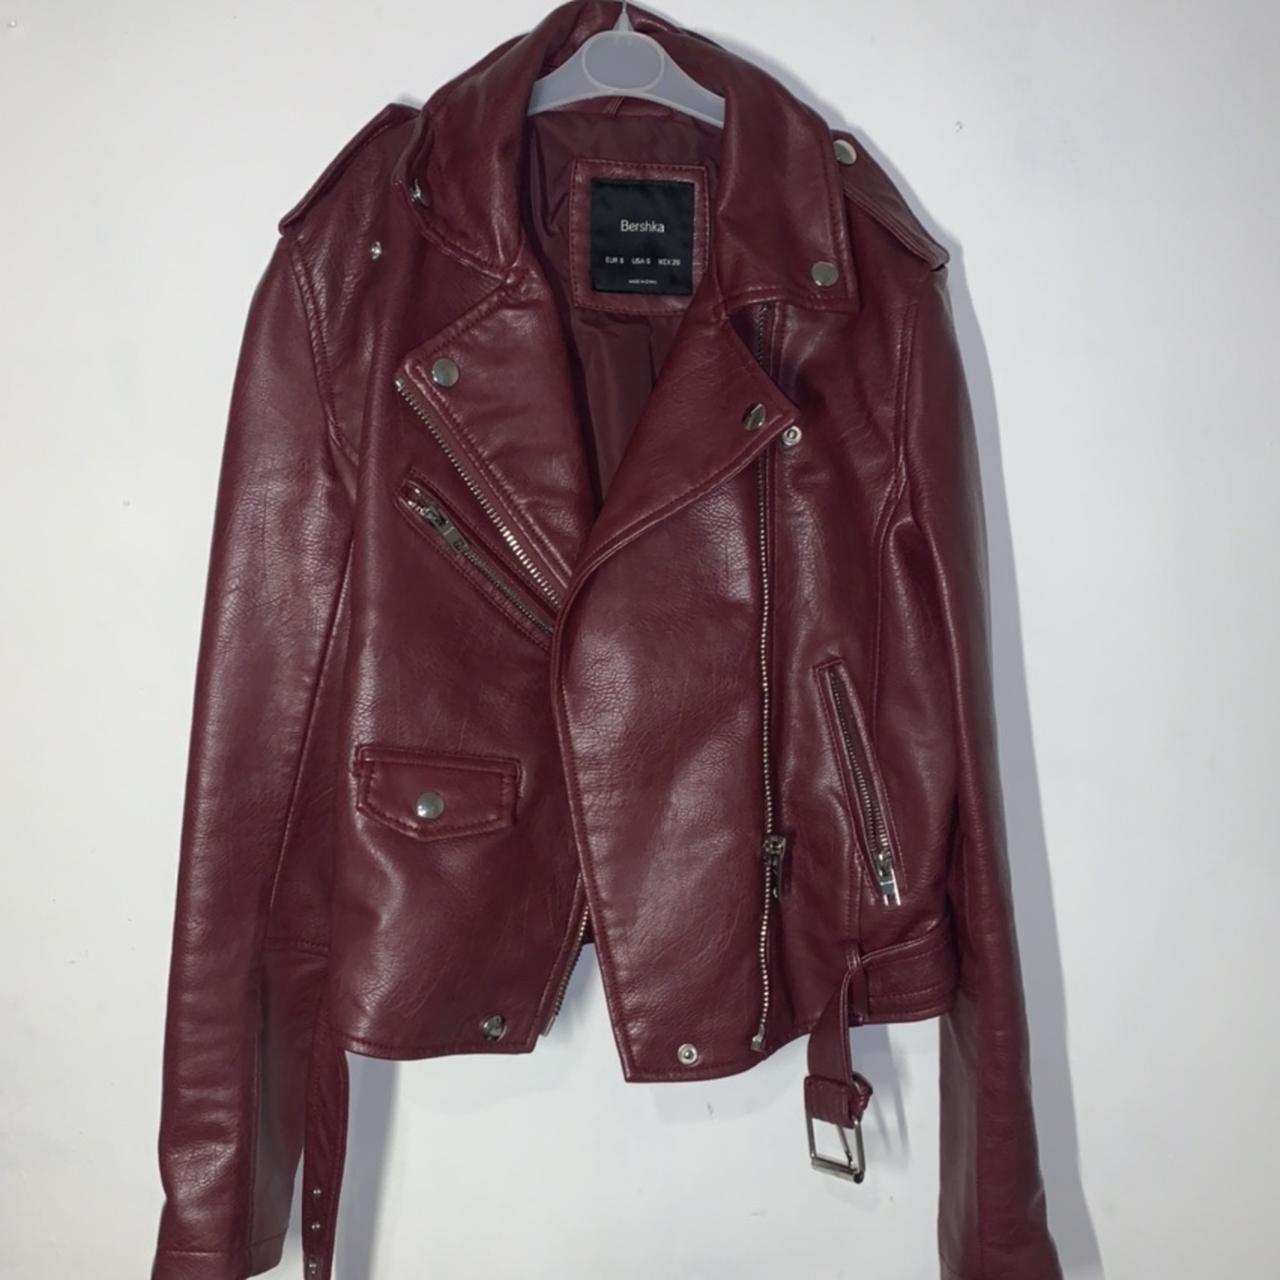 NEW Burgundy faux leather jacket from Bershka Has a... - Depop